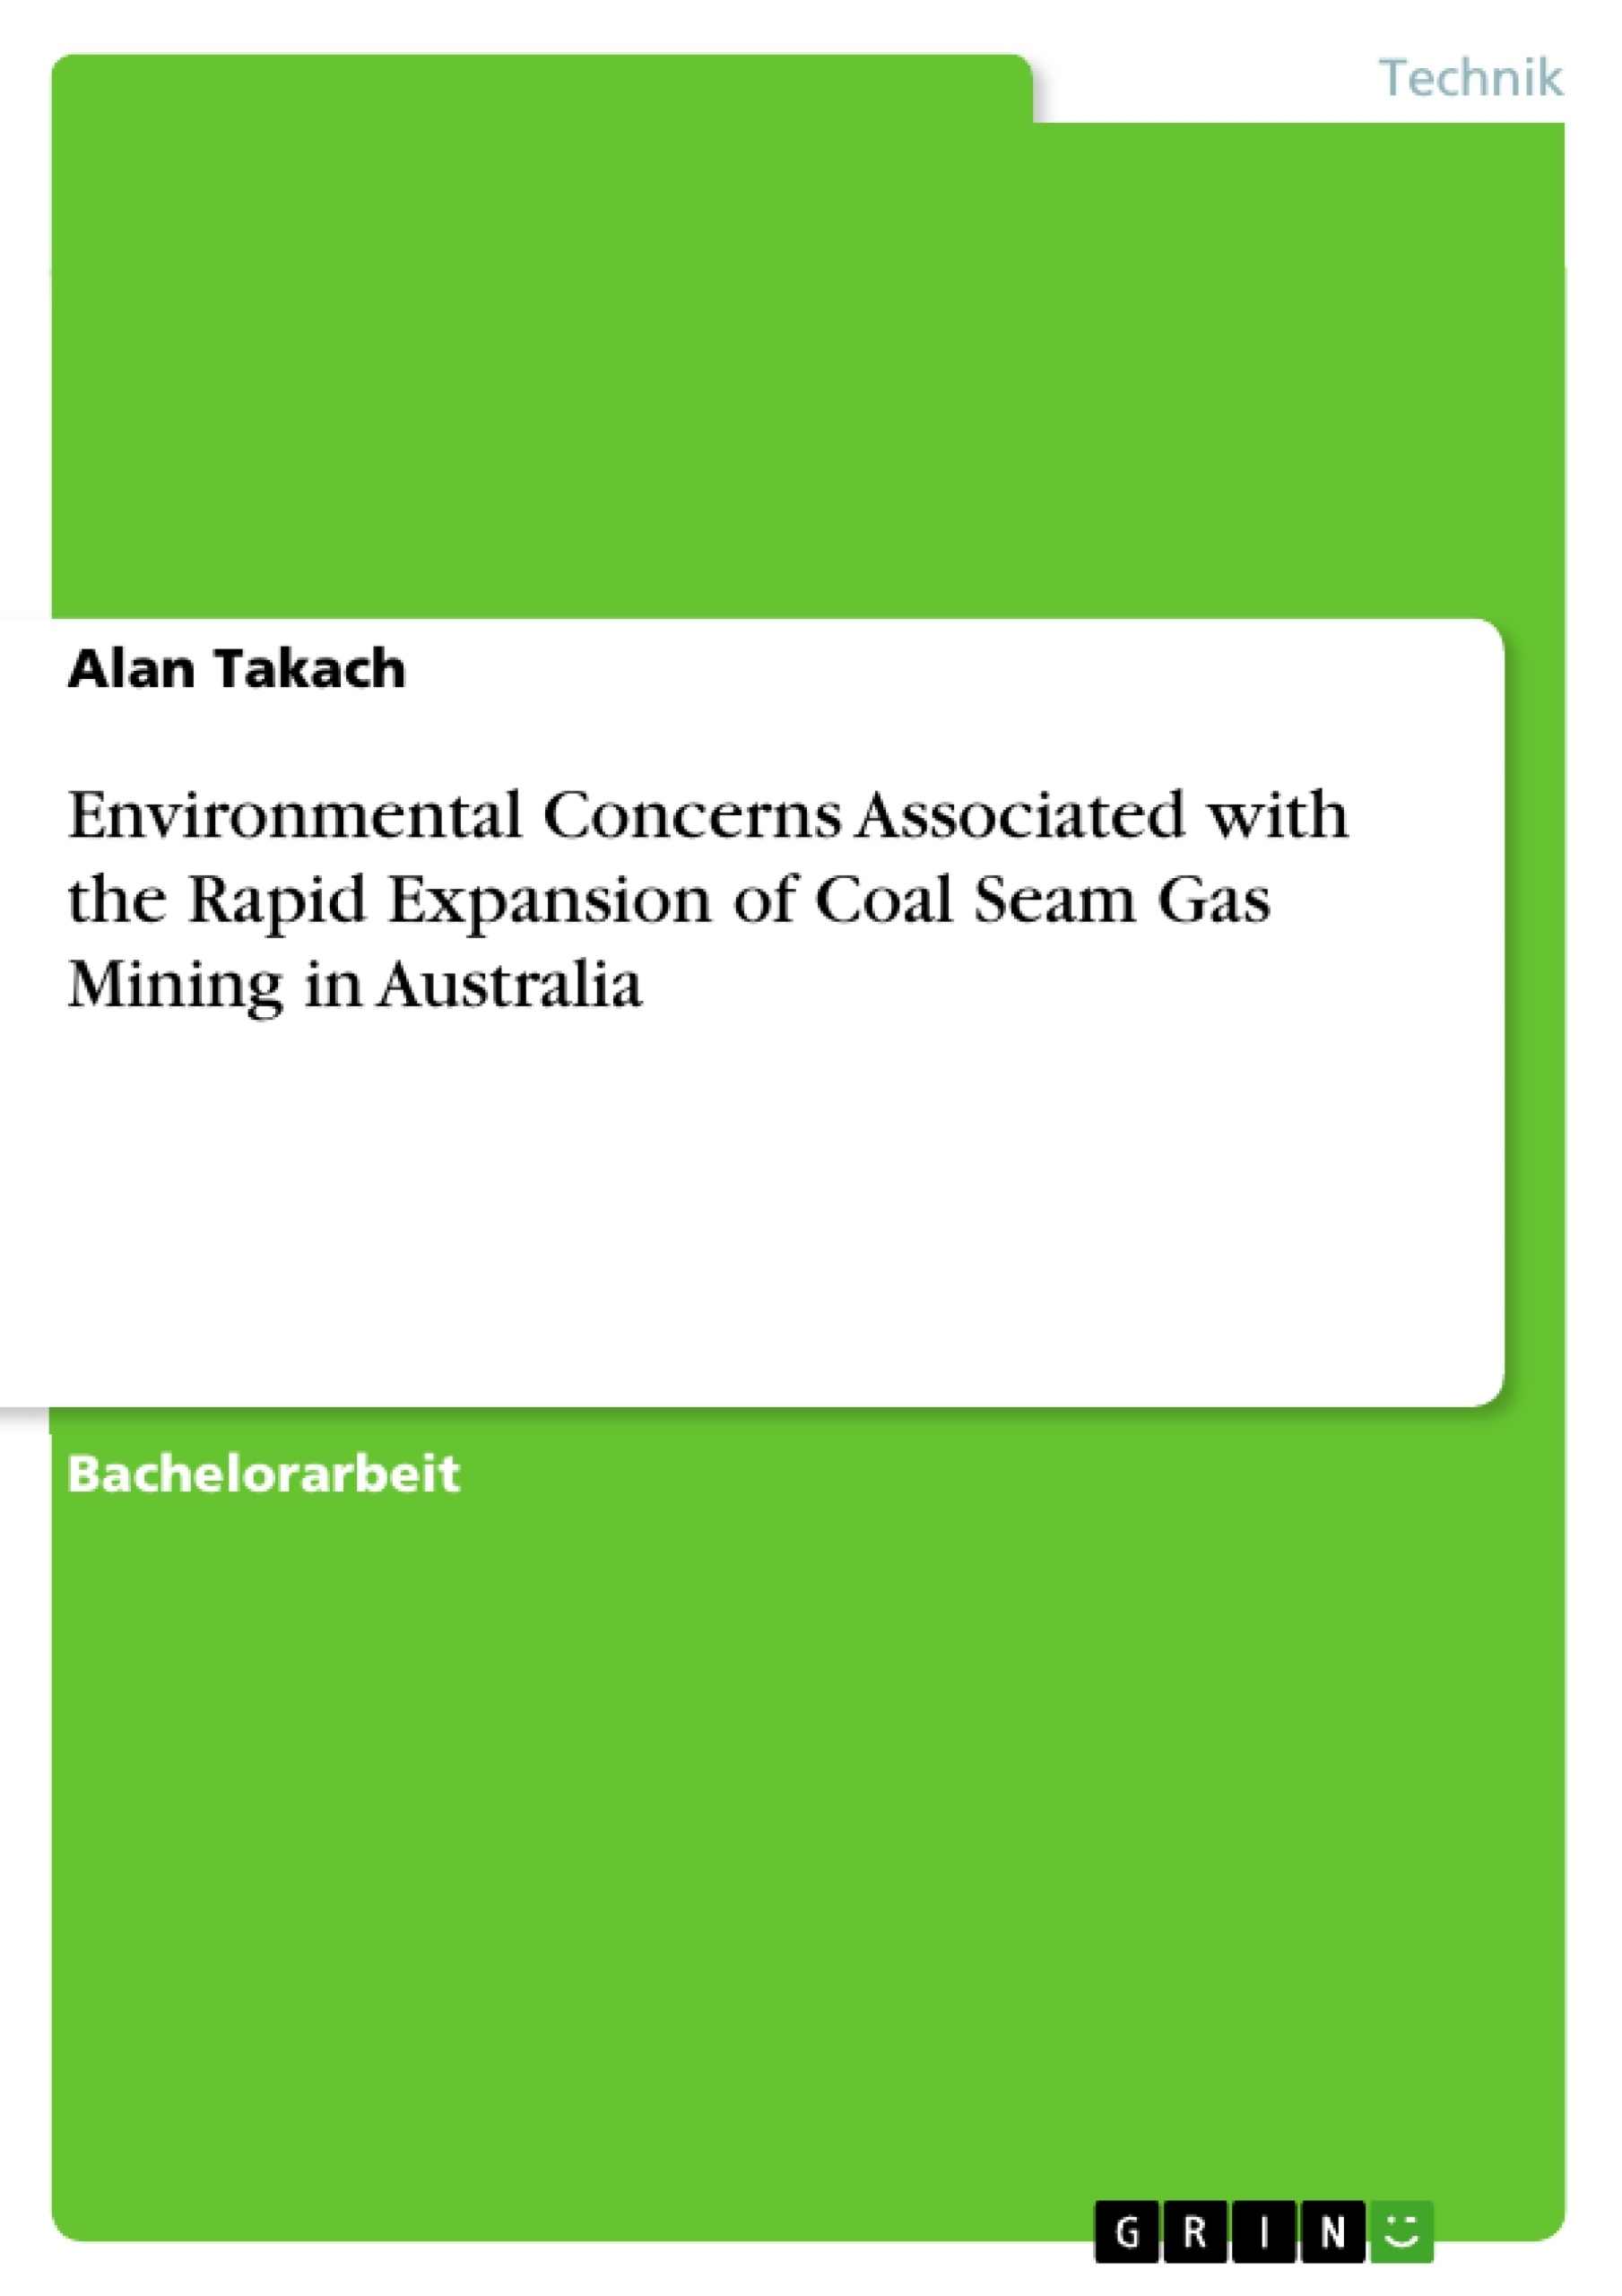 Titel: Environmental Concerns Associated with the Rapid Expansion of Coal Seam Gas Mining in Australia